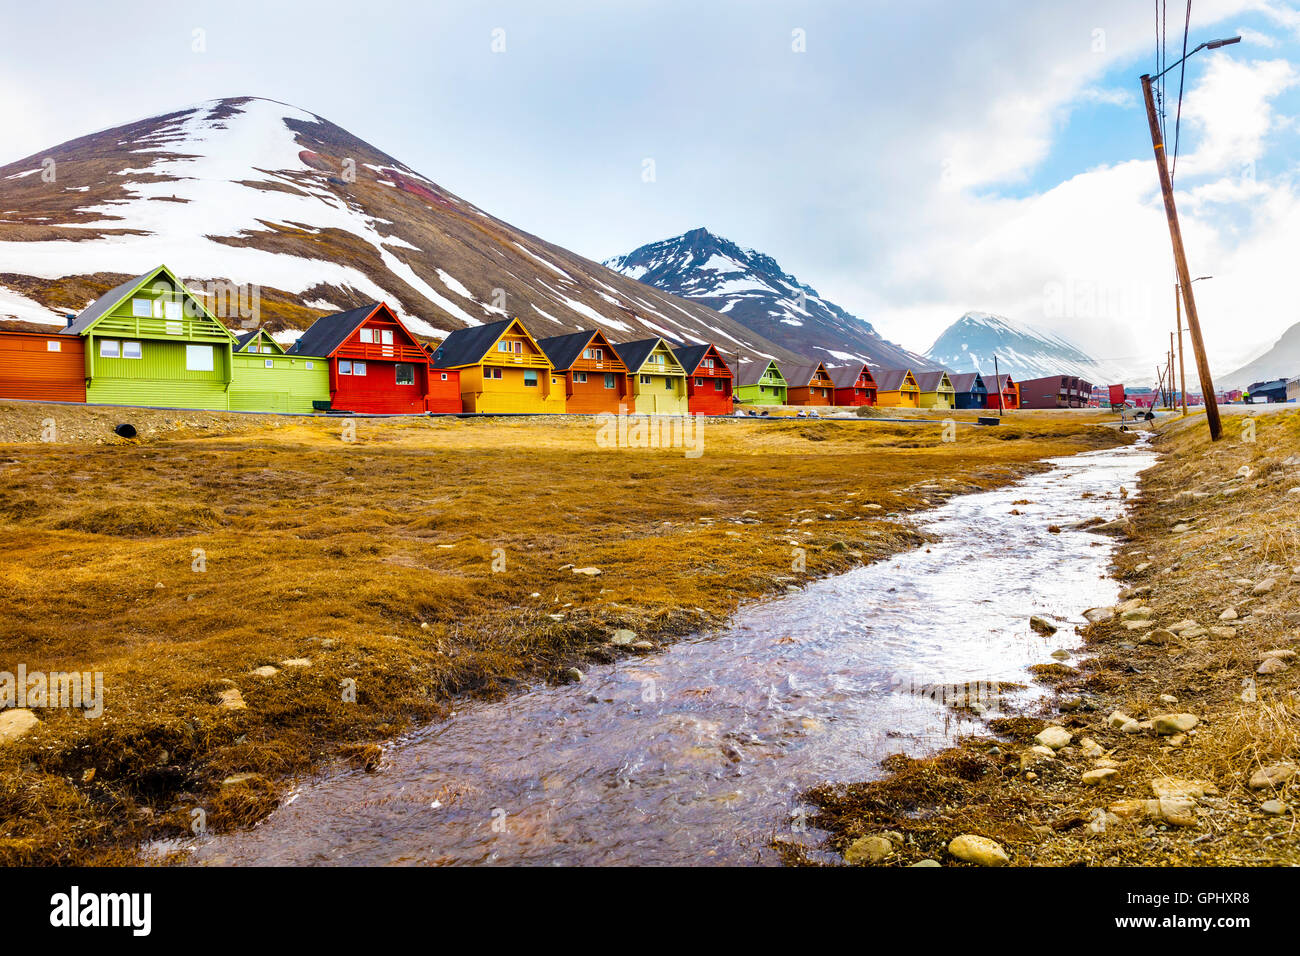 Colorful wooden houses at Longyearbyen in Svalbard Stock Photo